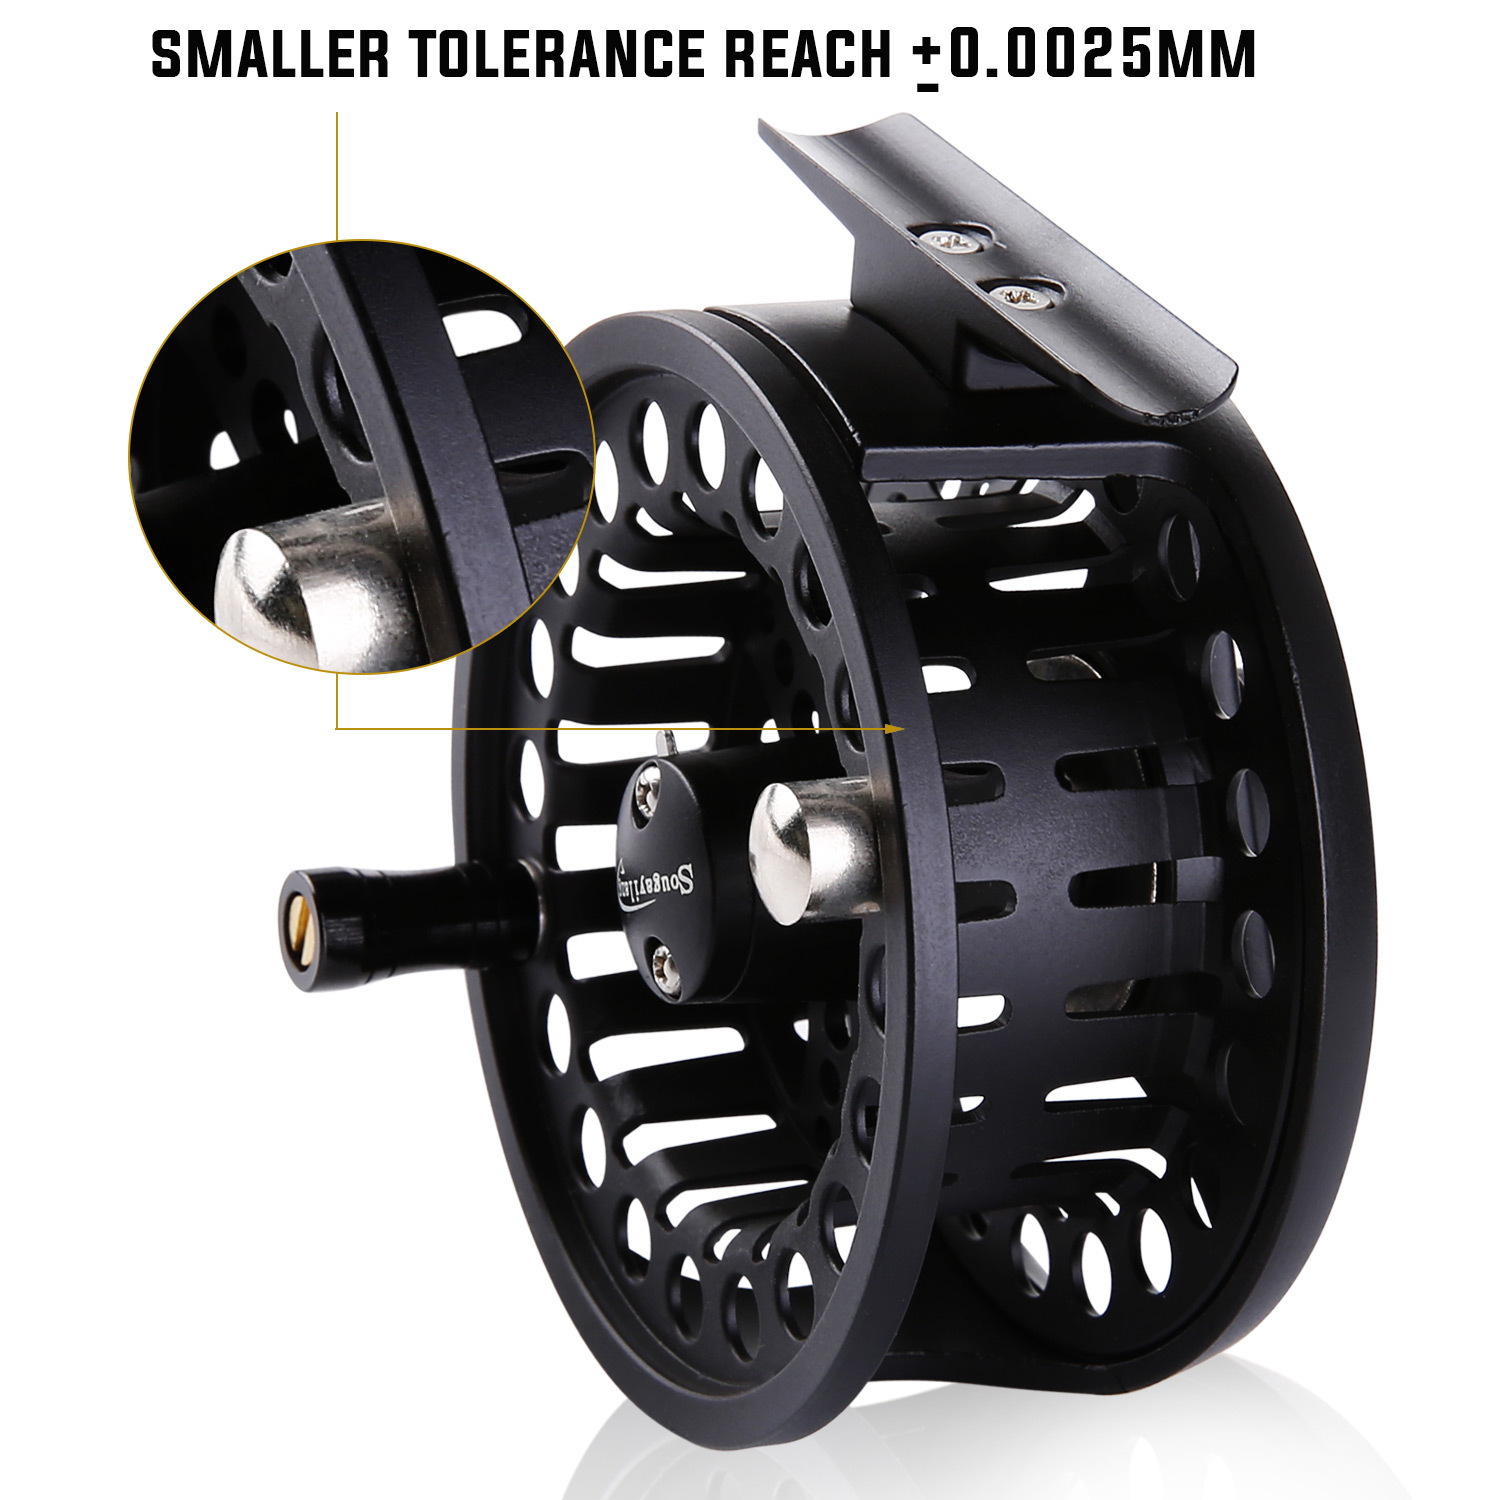 Sougayilang Full Metal Fly Fishing Reel 5/6 7/8 WT Large Arbor with CNC  Aluminum Alloy Spool Fly Fishing Reels for Trout Fishing